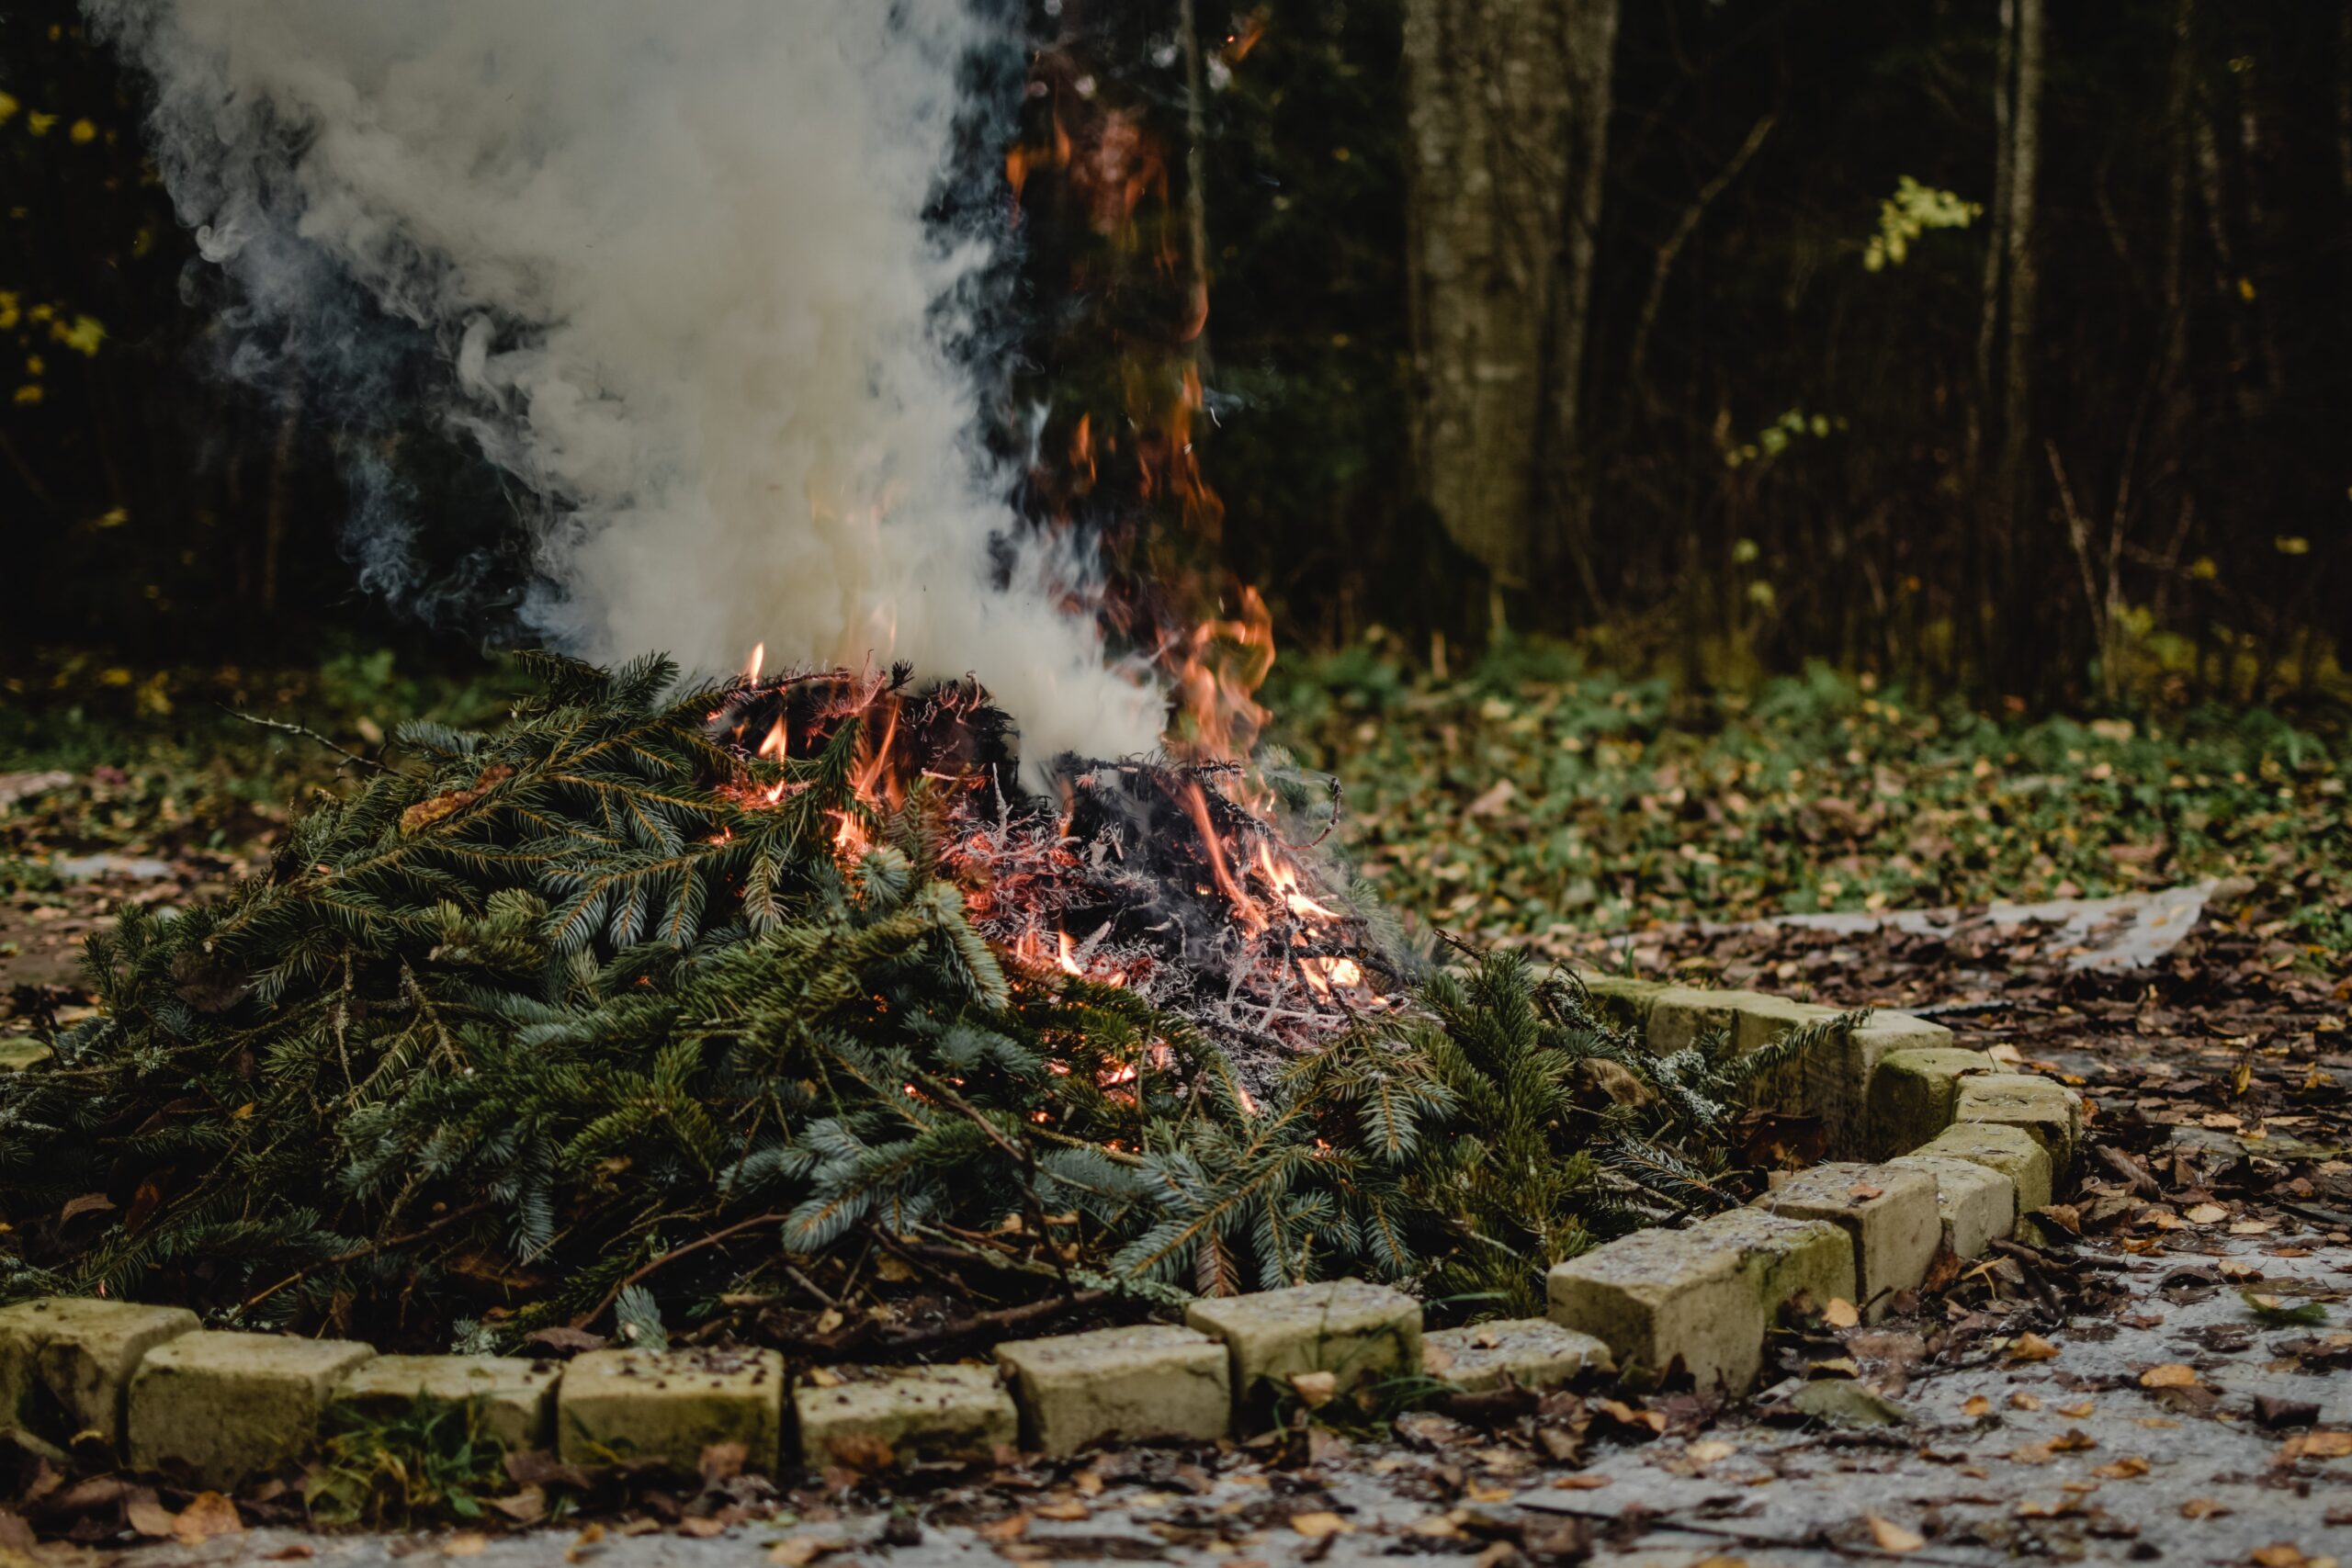 How Windy Is Too Windy For A Fire Pit? (8 Top Tips For Warmth)